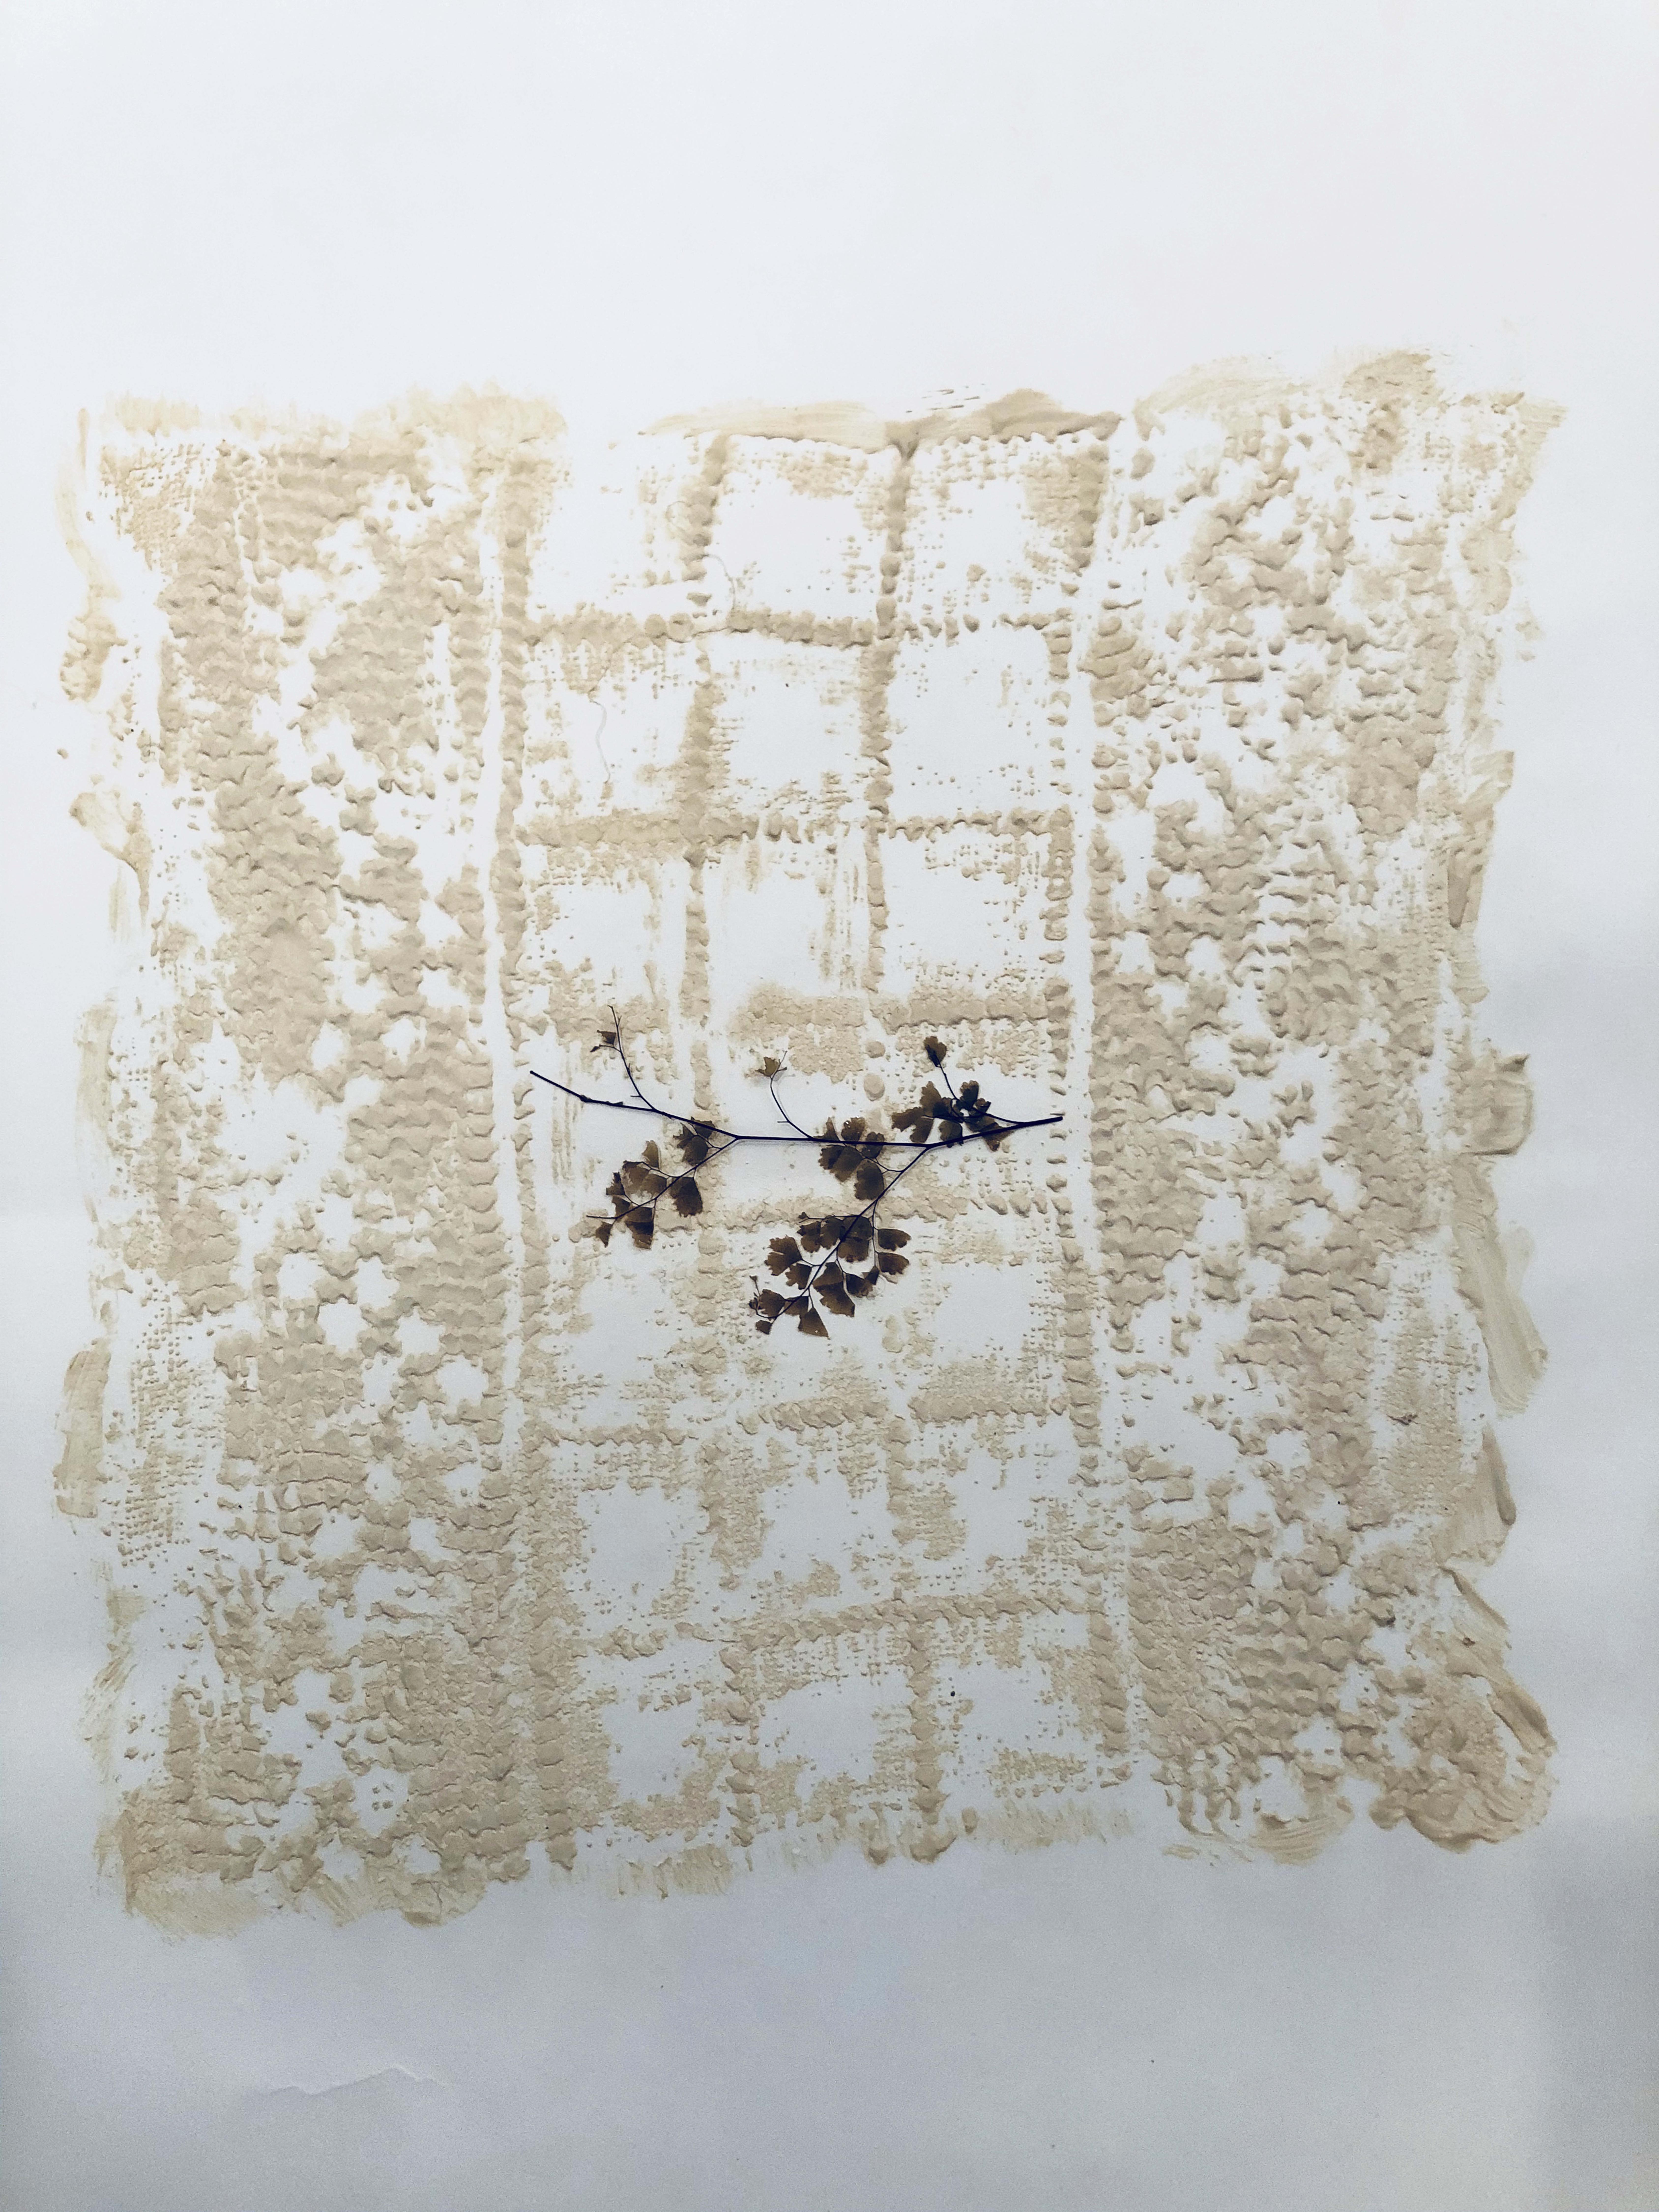 Jil Weinstock, Unwanted Collaborator (white latex and coffee stains), 2020, Plant life, white latex and rag paper, 30 x 22 inches